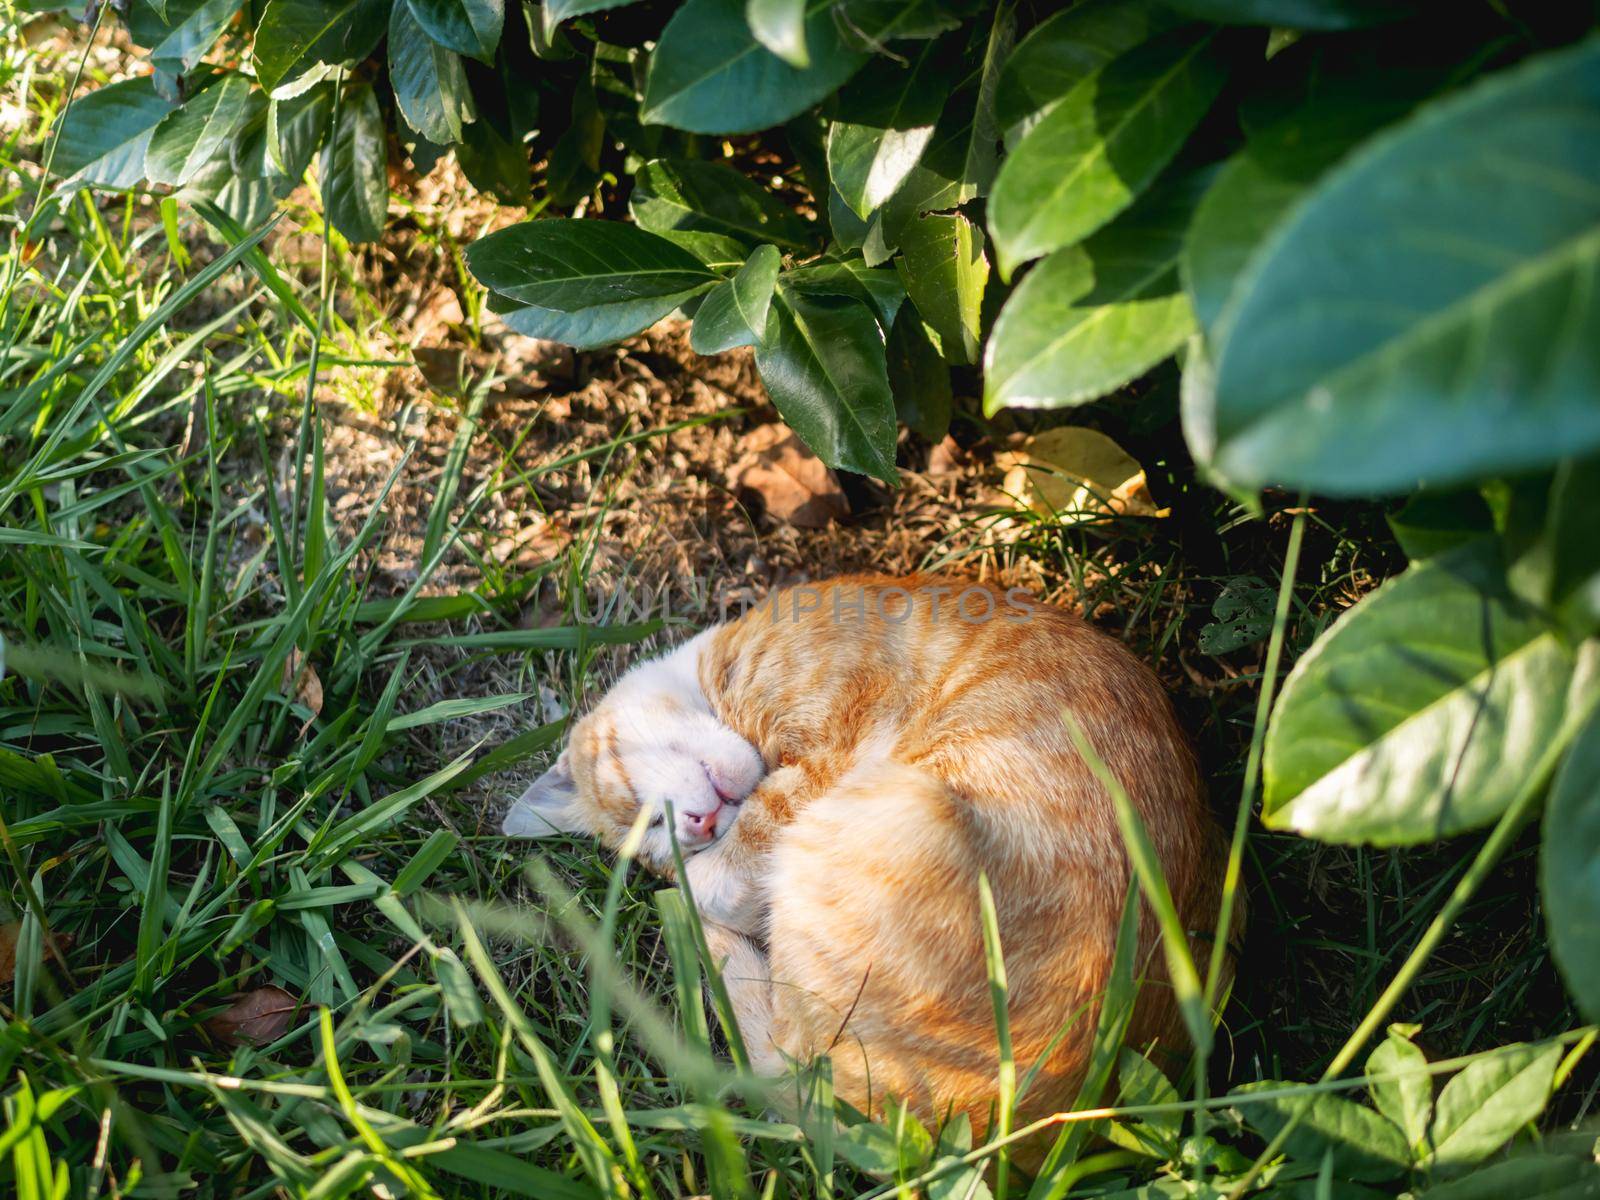 Stray tabby cat sleeps tight in sunlight under bush. Ginger cat has a nap in summer warm evening. Fluffy animal curled up into a ball.